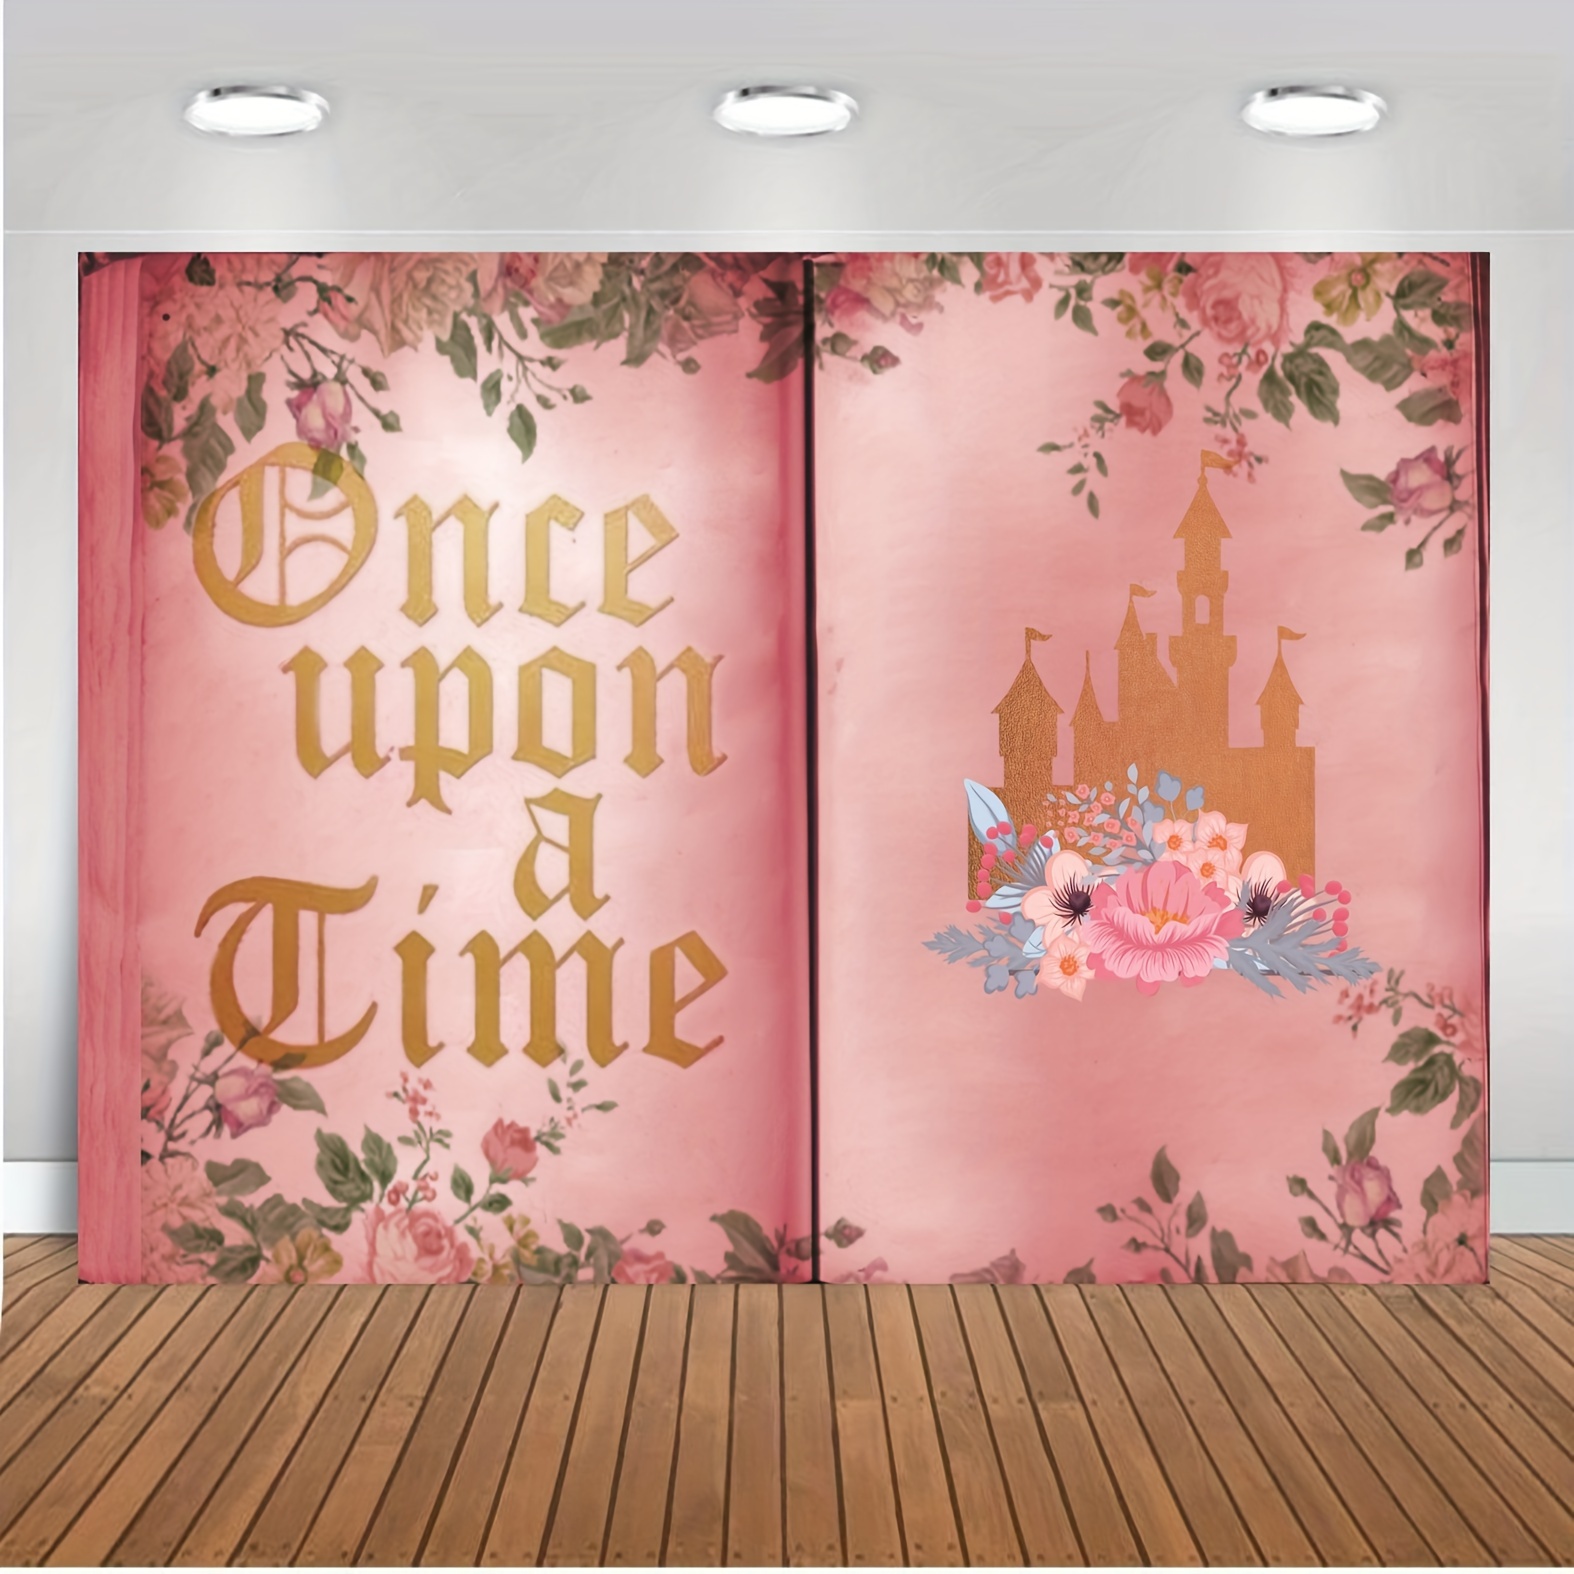 ABLIN 7x5ft Fairy Tale Books Backdrop Old Opening Book Once Upon A Time Ancient Castle Princess Romantic Story Photo Background Wedding Birthday